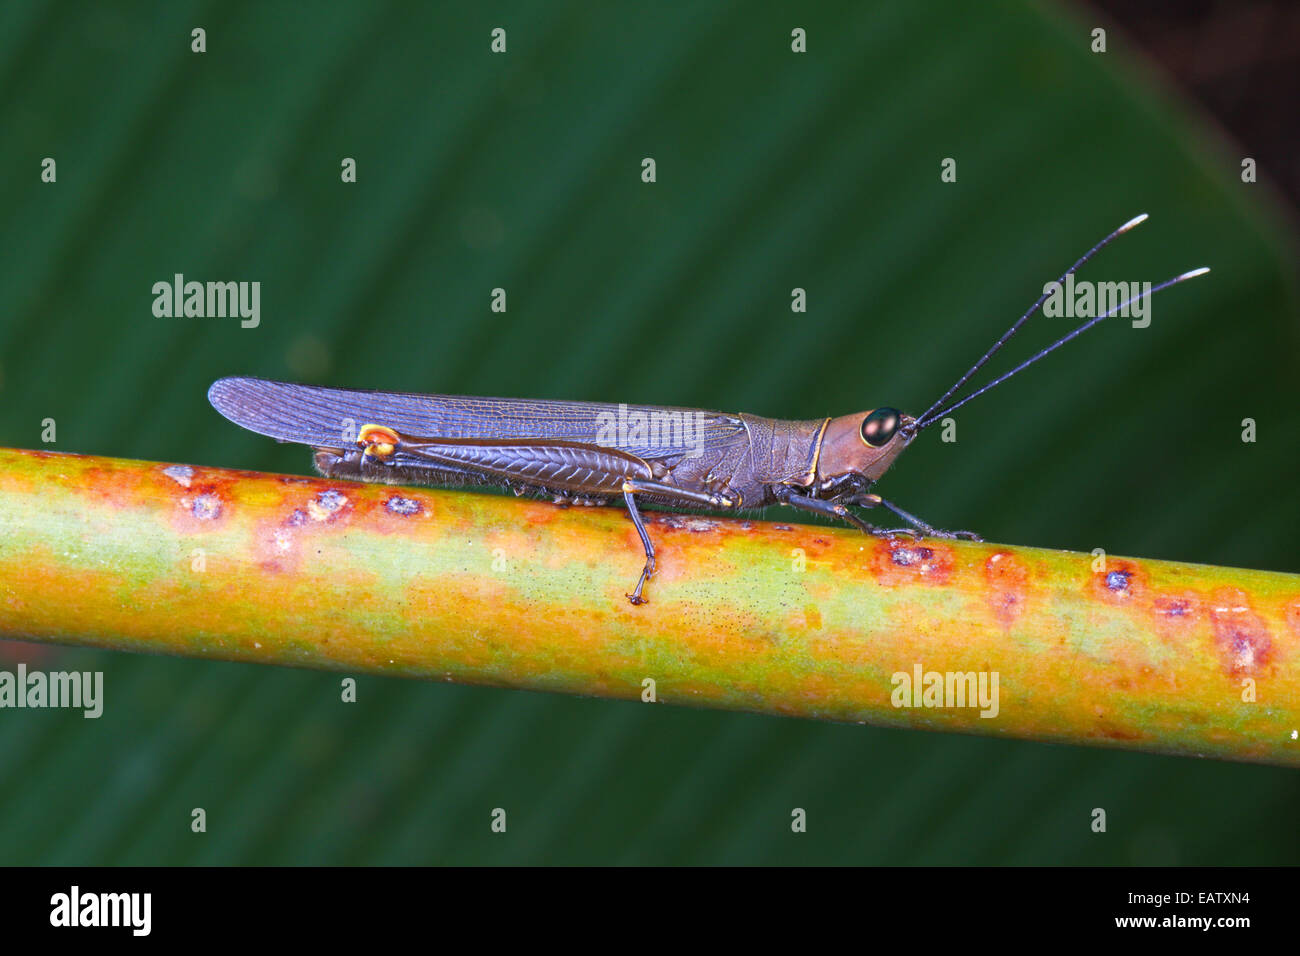 An unusual elongated brown grasshopper on a plant stem. Stock Photo